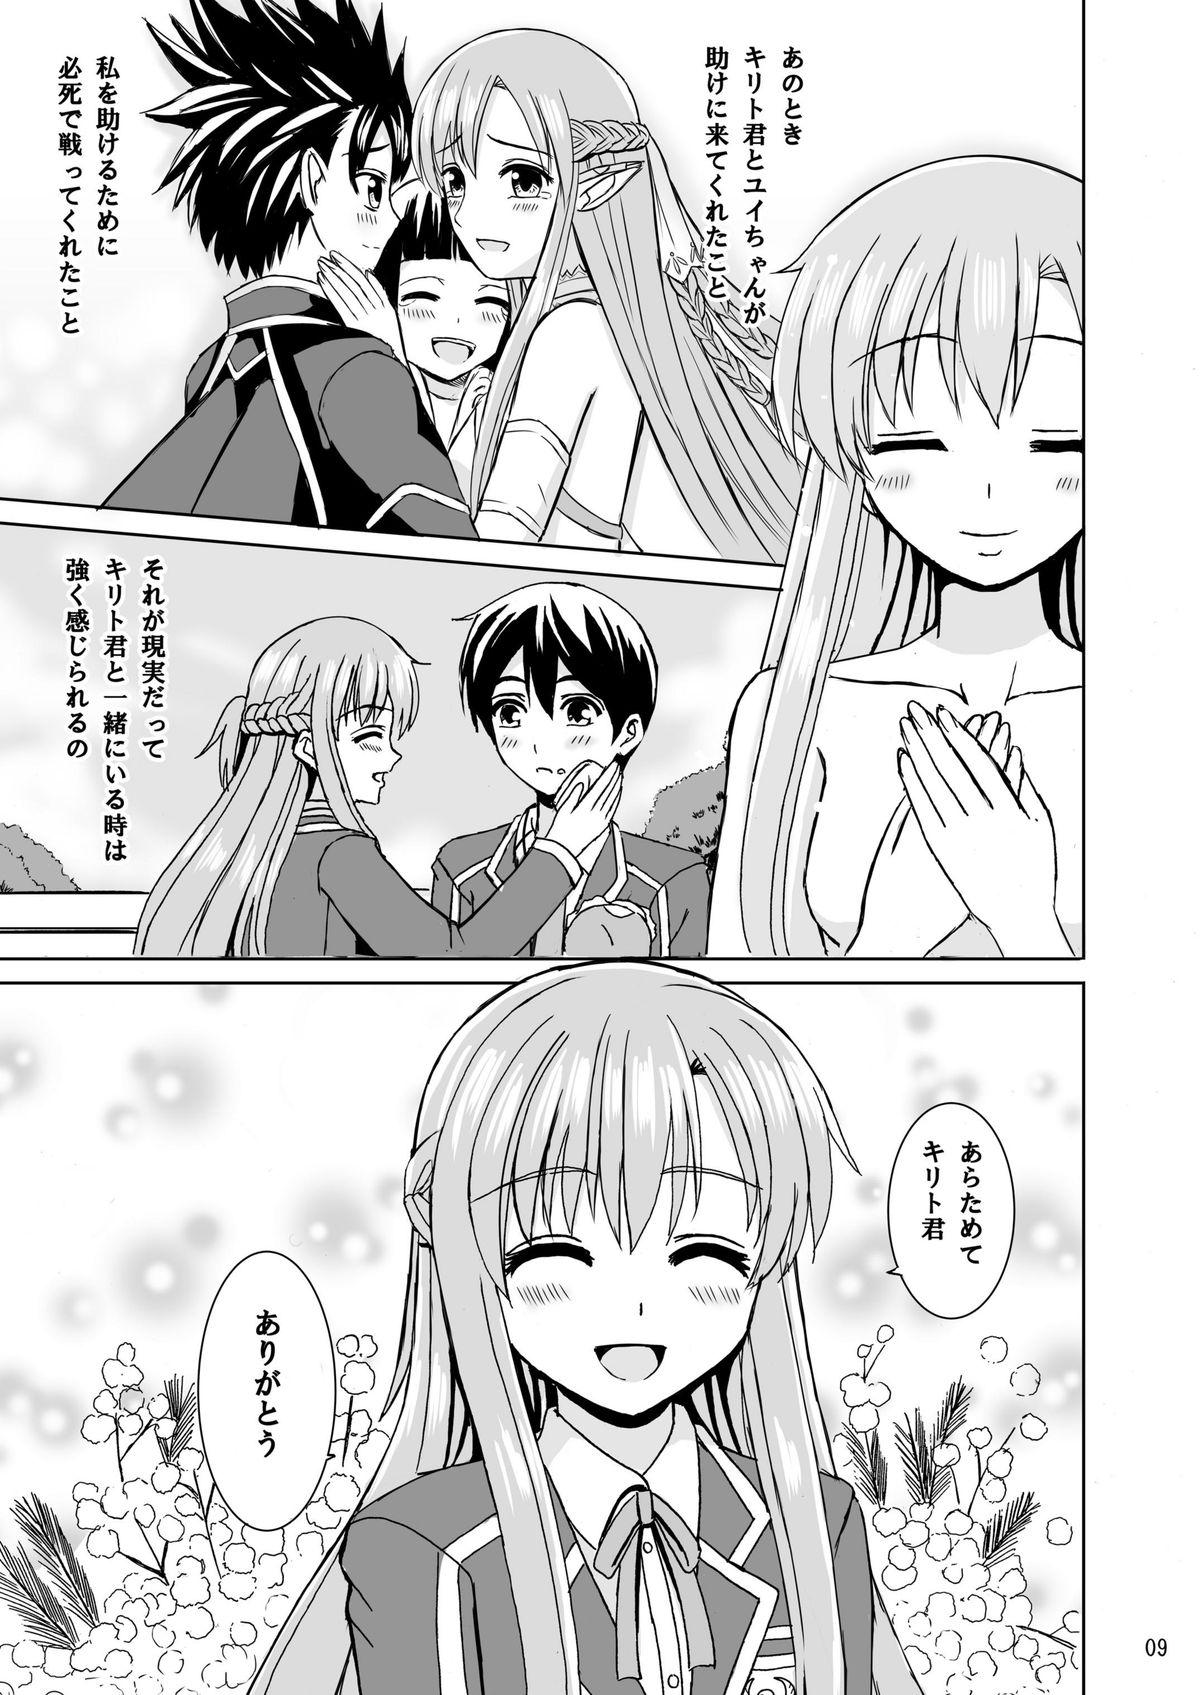 Bbc Zutto Kimi to Issho ni - Sword art online Cocksuckers - Page 9